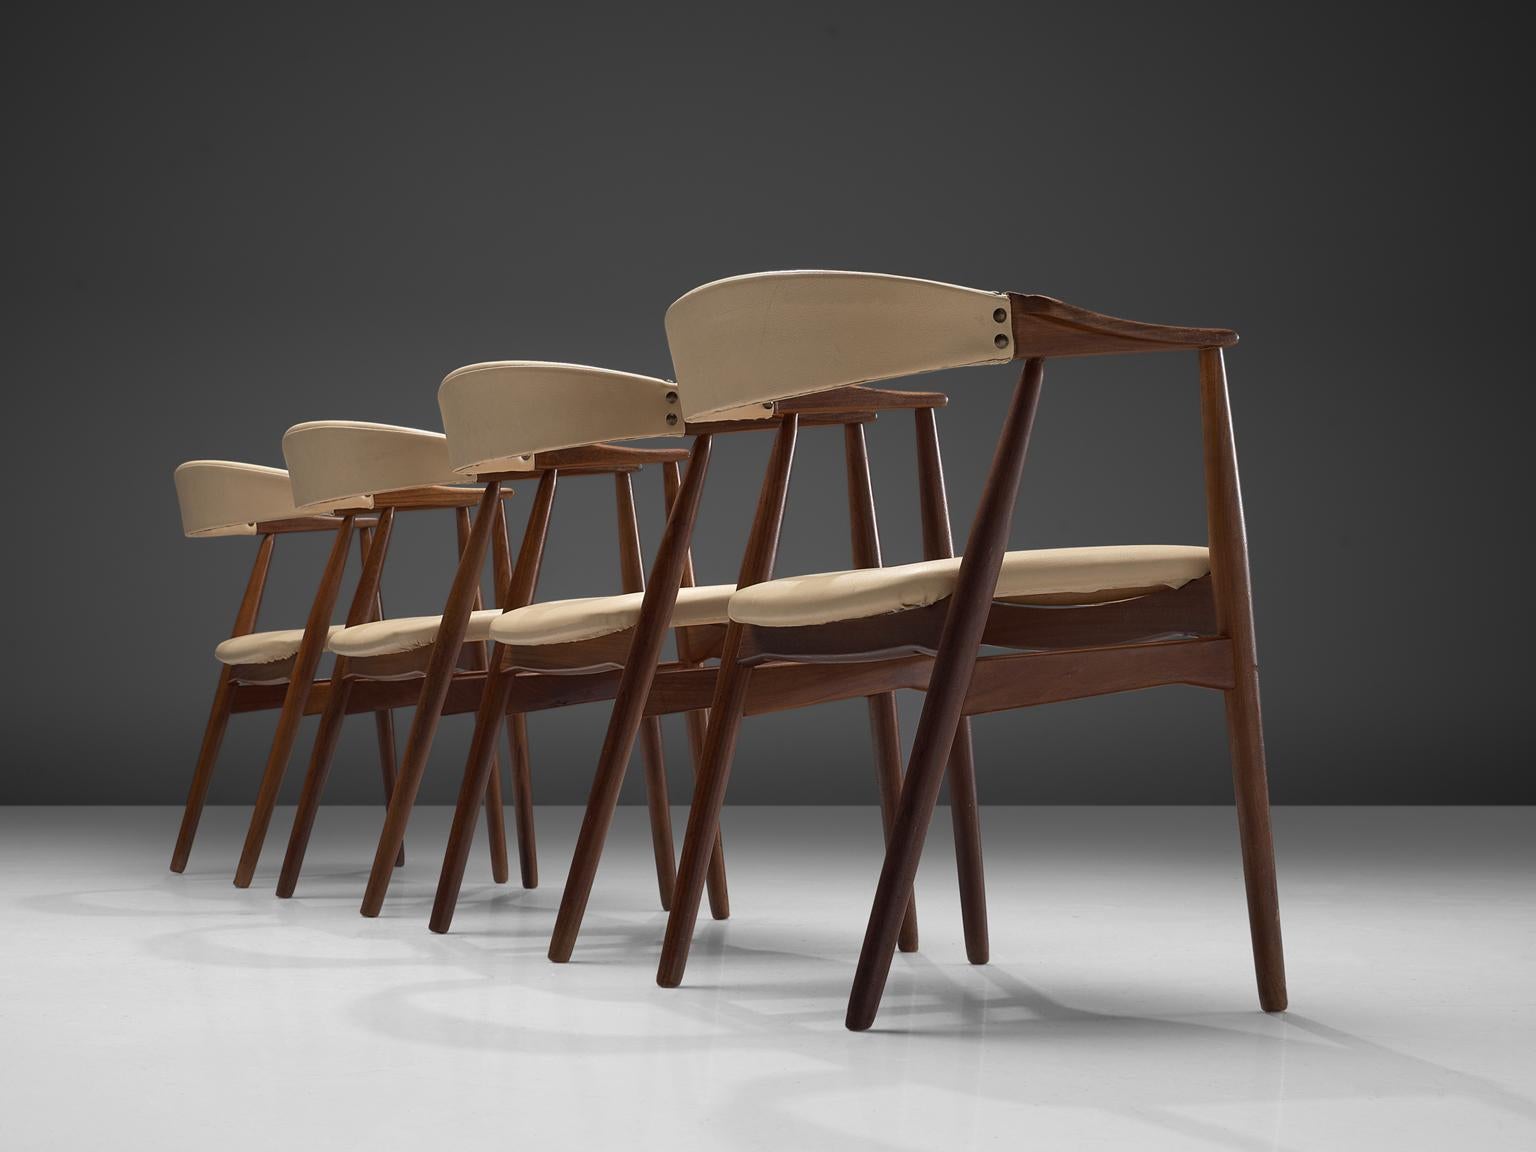 Set of four dining chairs, walnut, brass and leatherette, Denmark, 1960s.

This wonderful set of dining chairs are a great example of Danish midcentury design. The chair is sculptural and made of walnut. The legs are tapered and connected to the